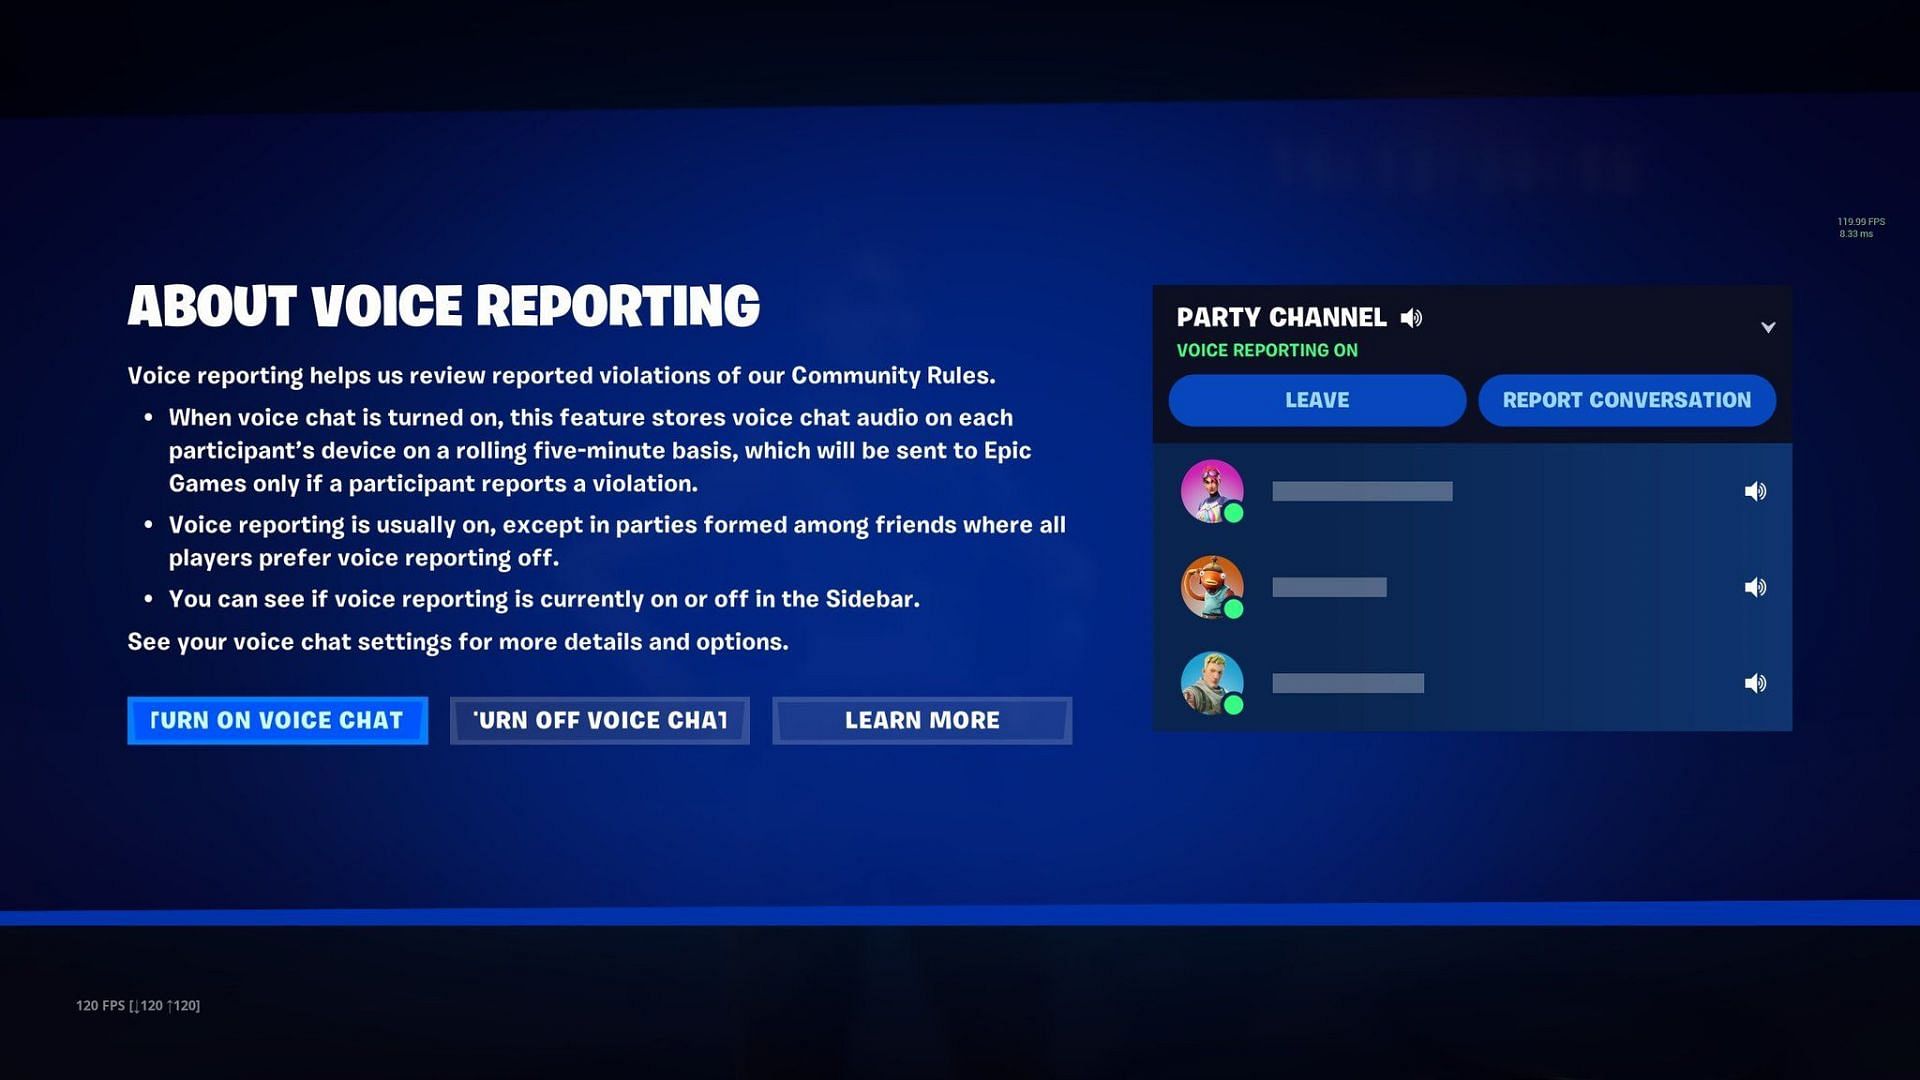 Is Fortnite - Voice Chat Down? Check current status, outages, and problems